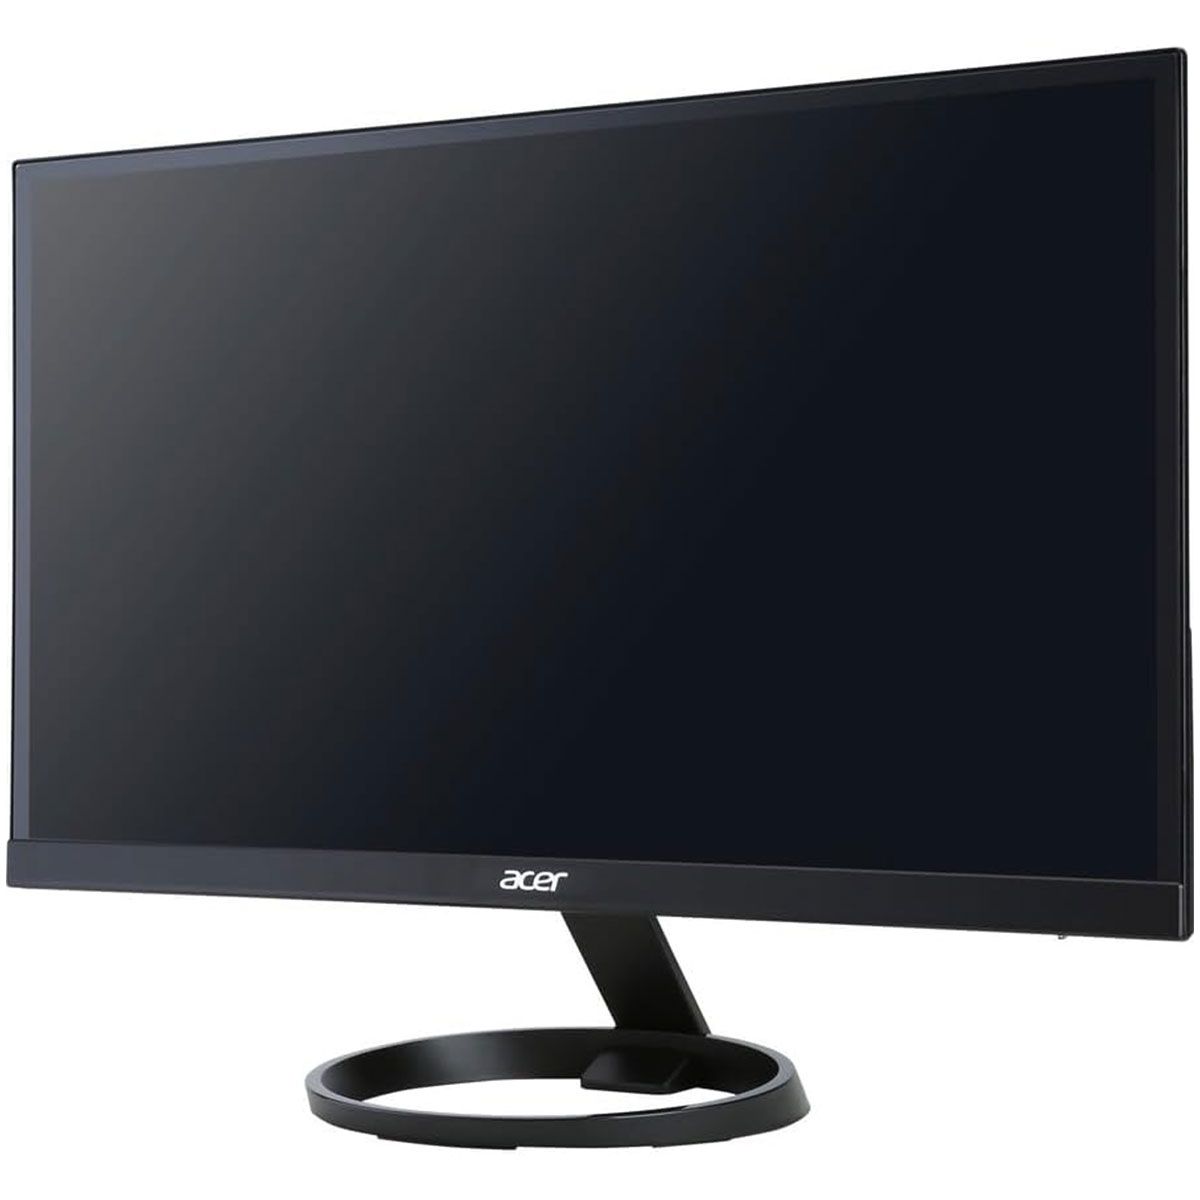 Acer R1 Series (R241Y) 23.8-inch Full HD LED Monitor - Black Digital Displays - Monitors Acer    - Simple Cell Bulk Wholesale Pricing - USA Seller